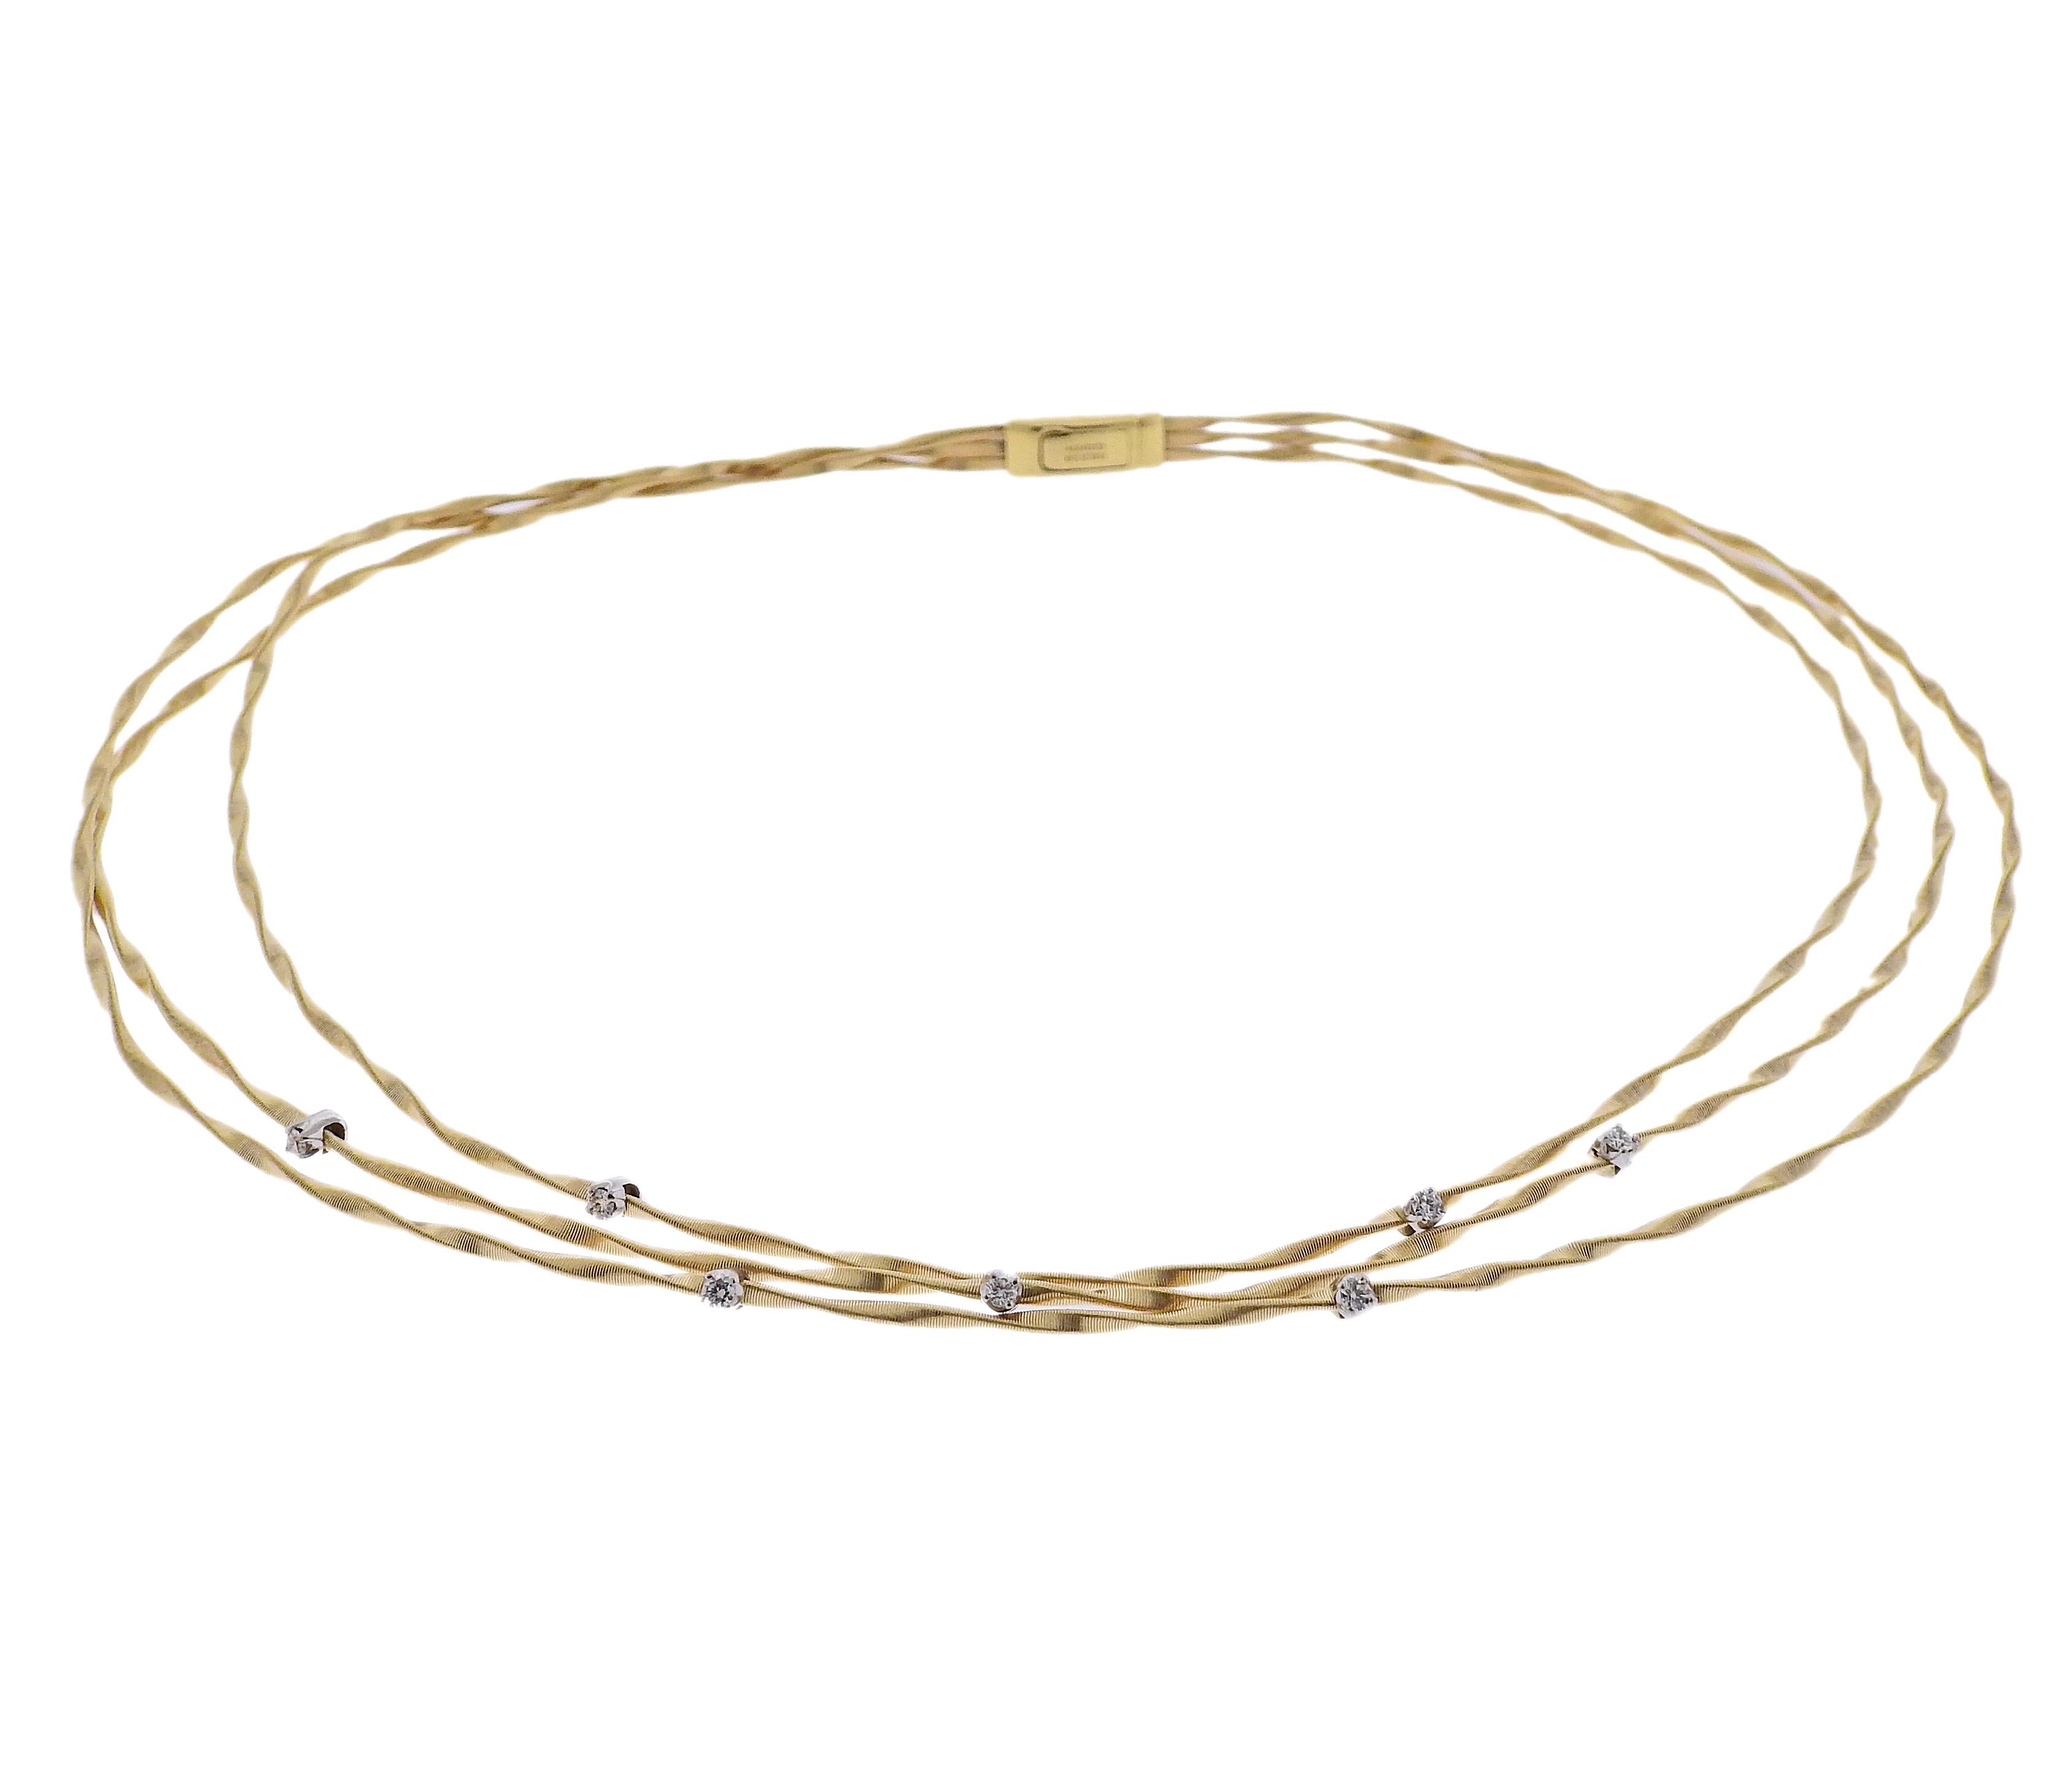 Marco Bicego Marrakech collection 18K gold three strand necklace, set with 0.60ctw of VS/G white diamonds. Necklace is 16